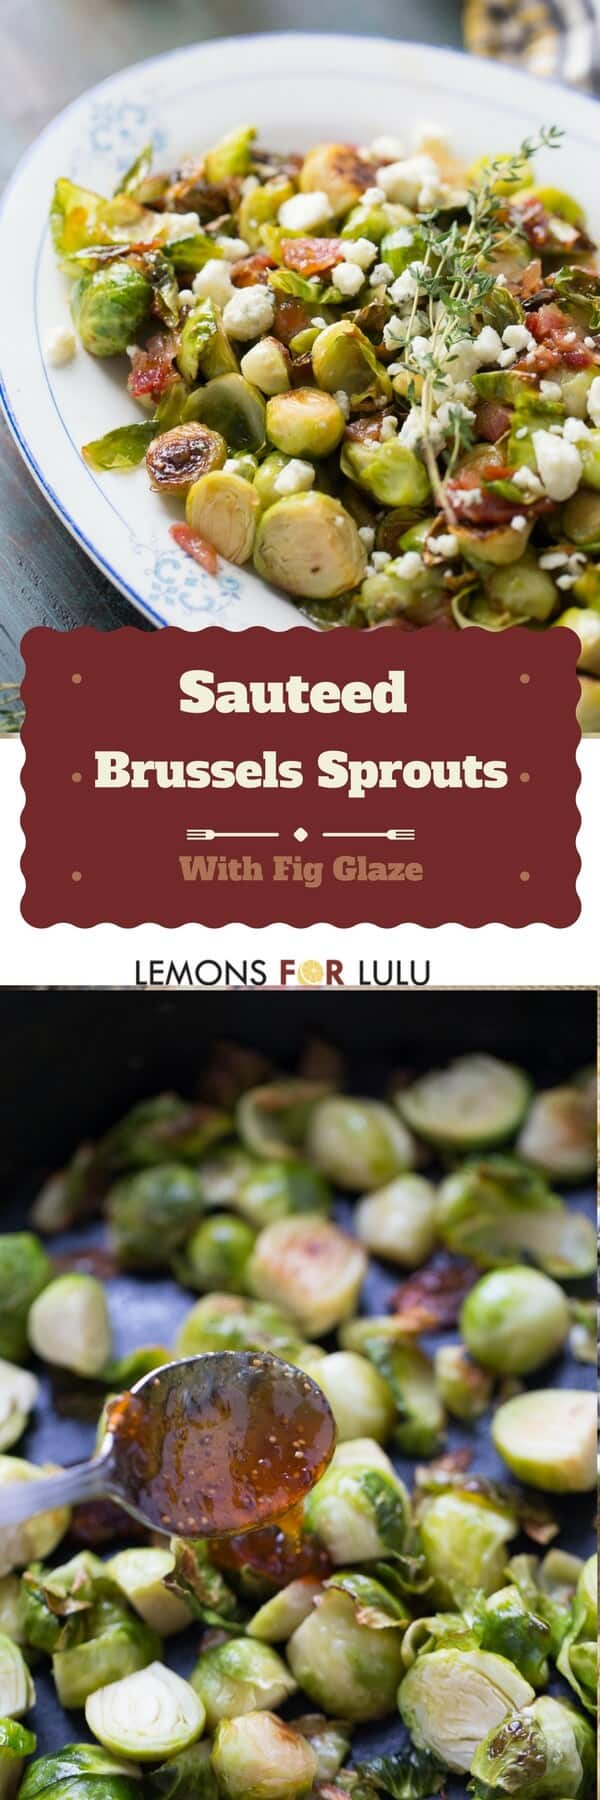 No boring Brussels sprouts here! These sautéed Brussels sprouts are packed with flavor!